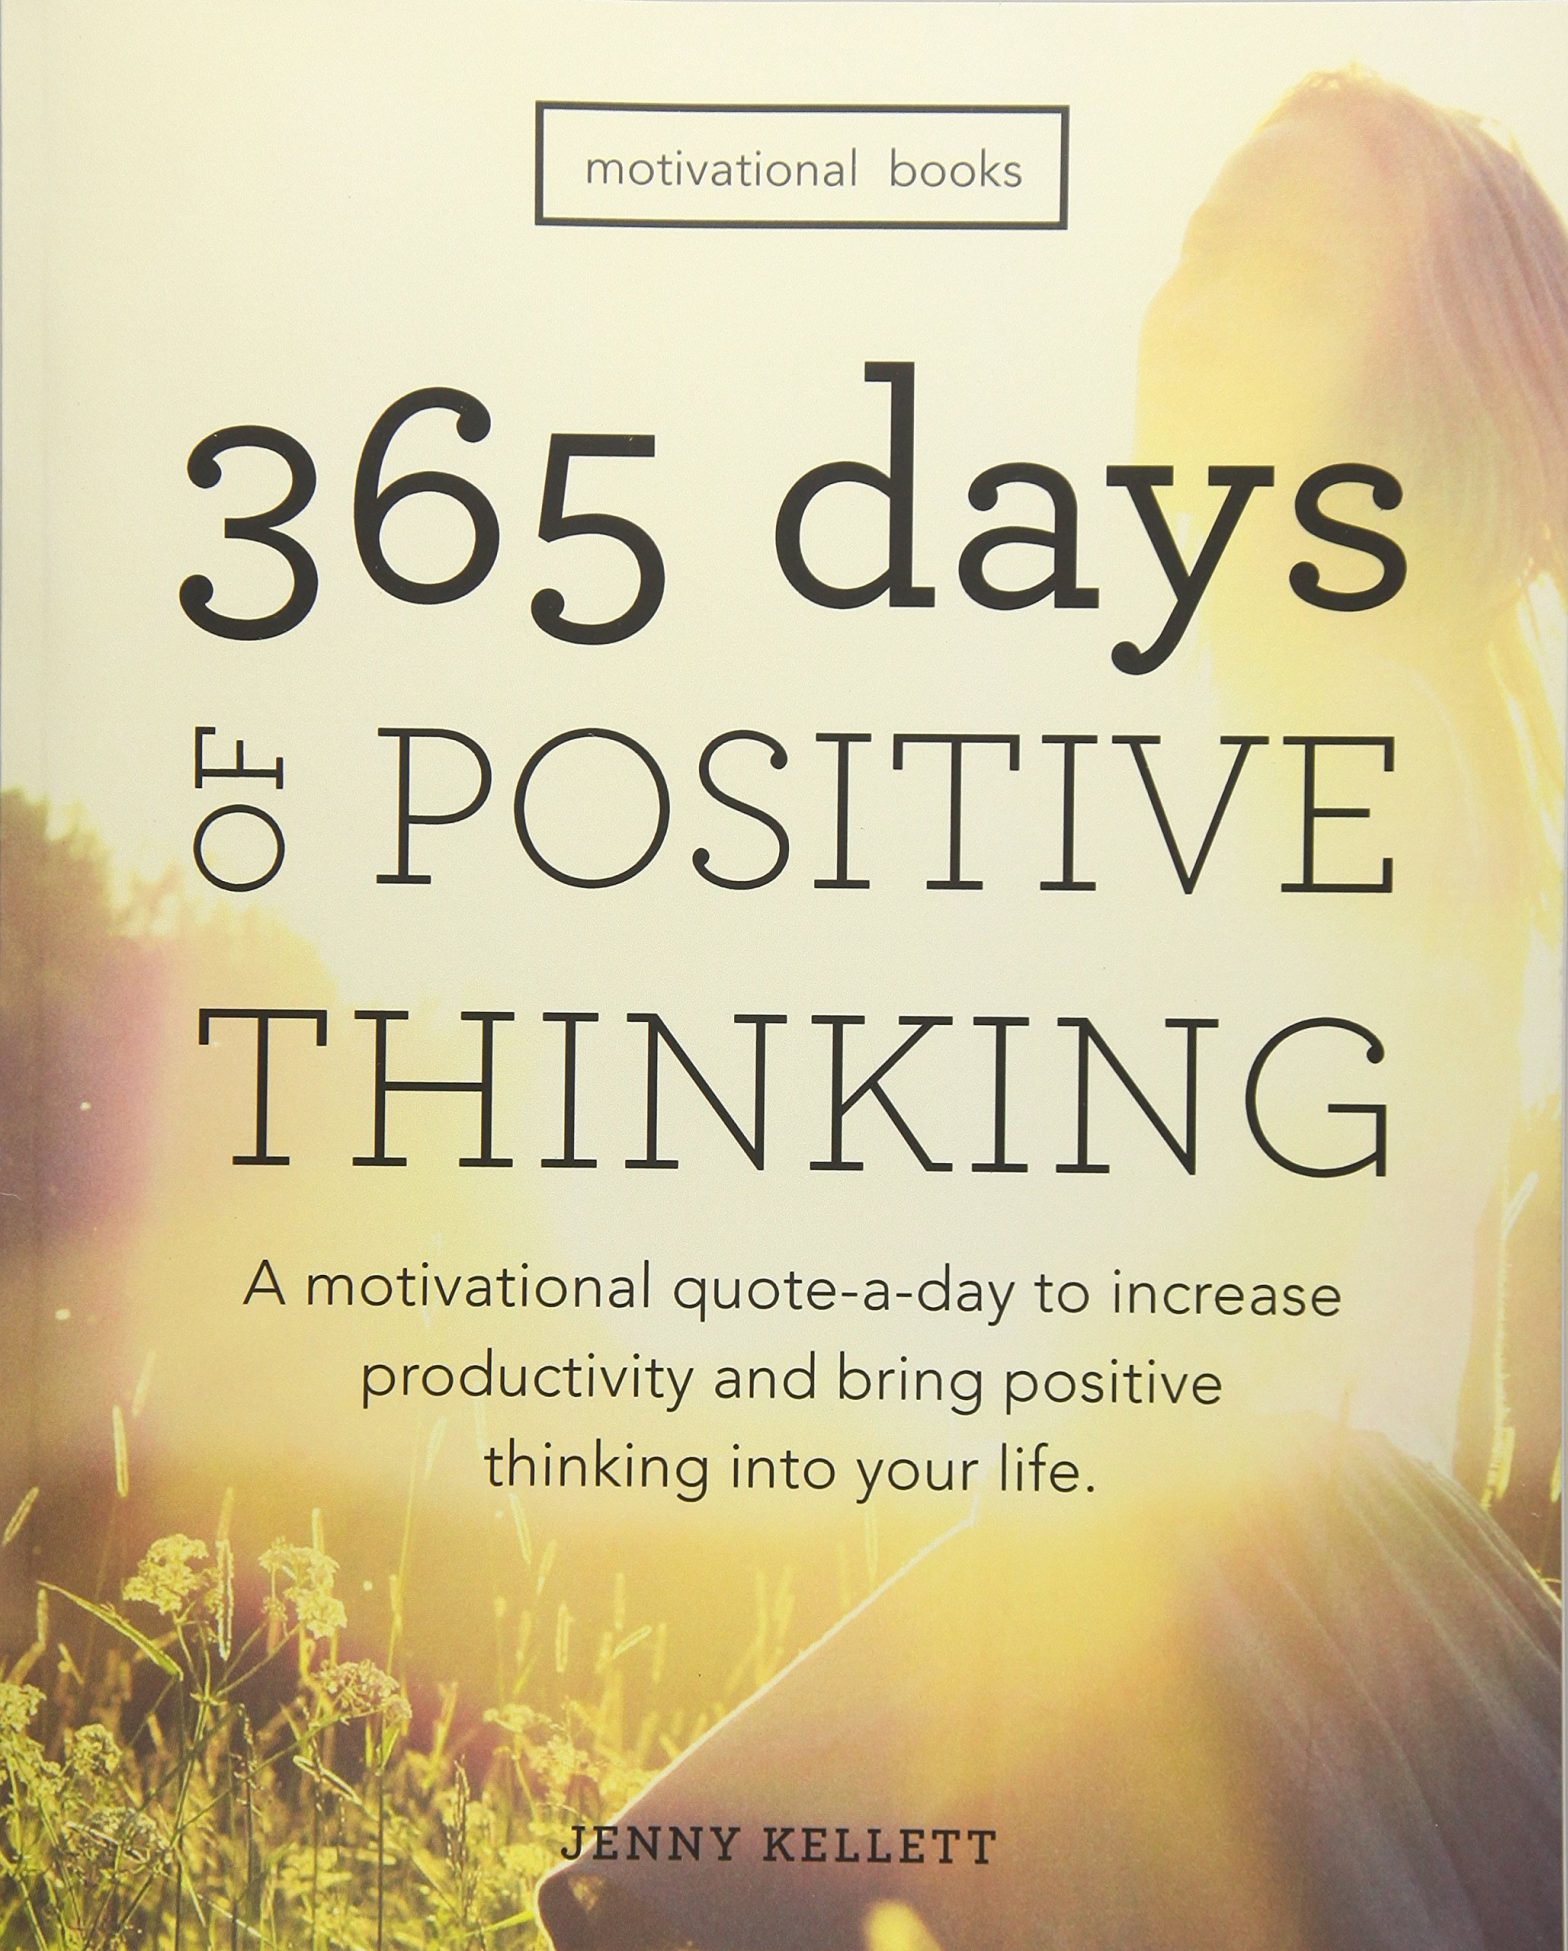 “365 days of positive thinking”